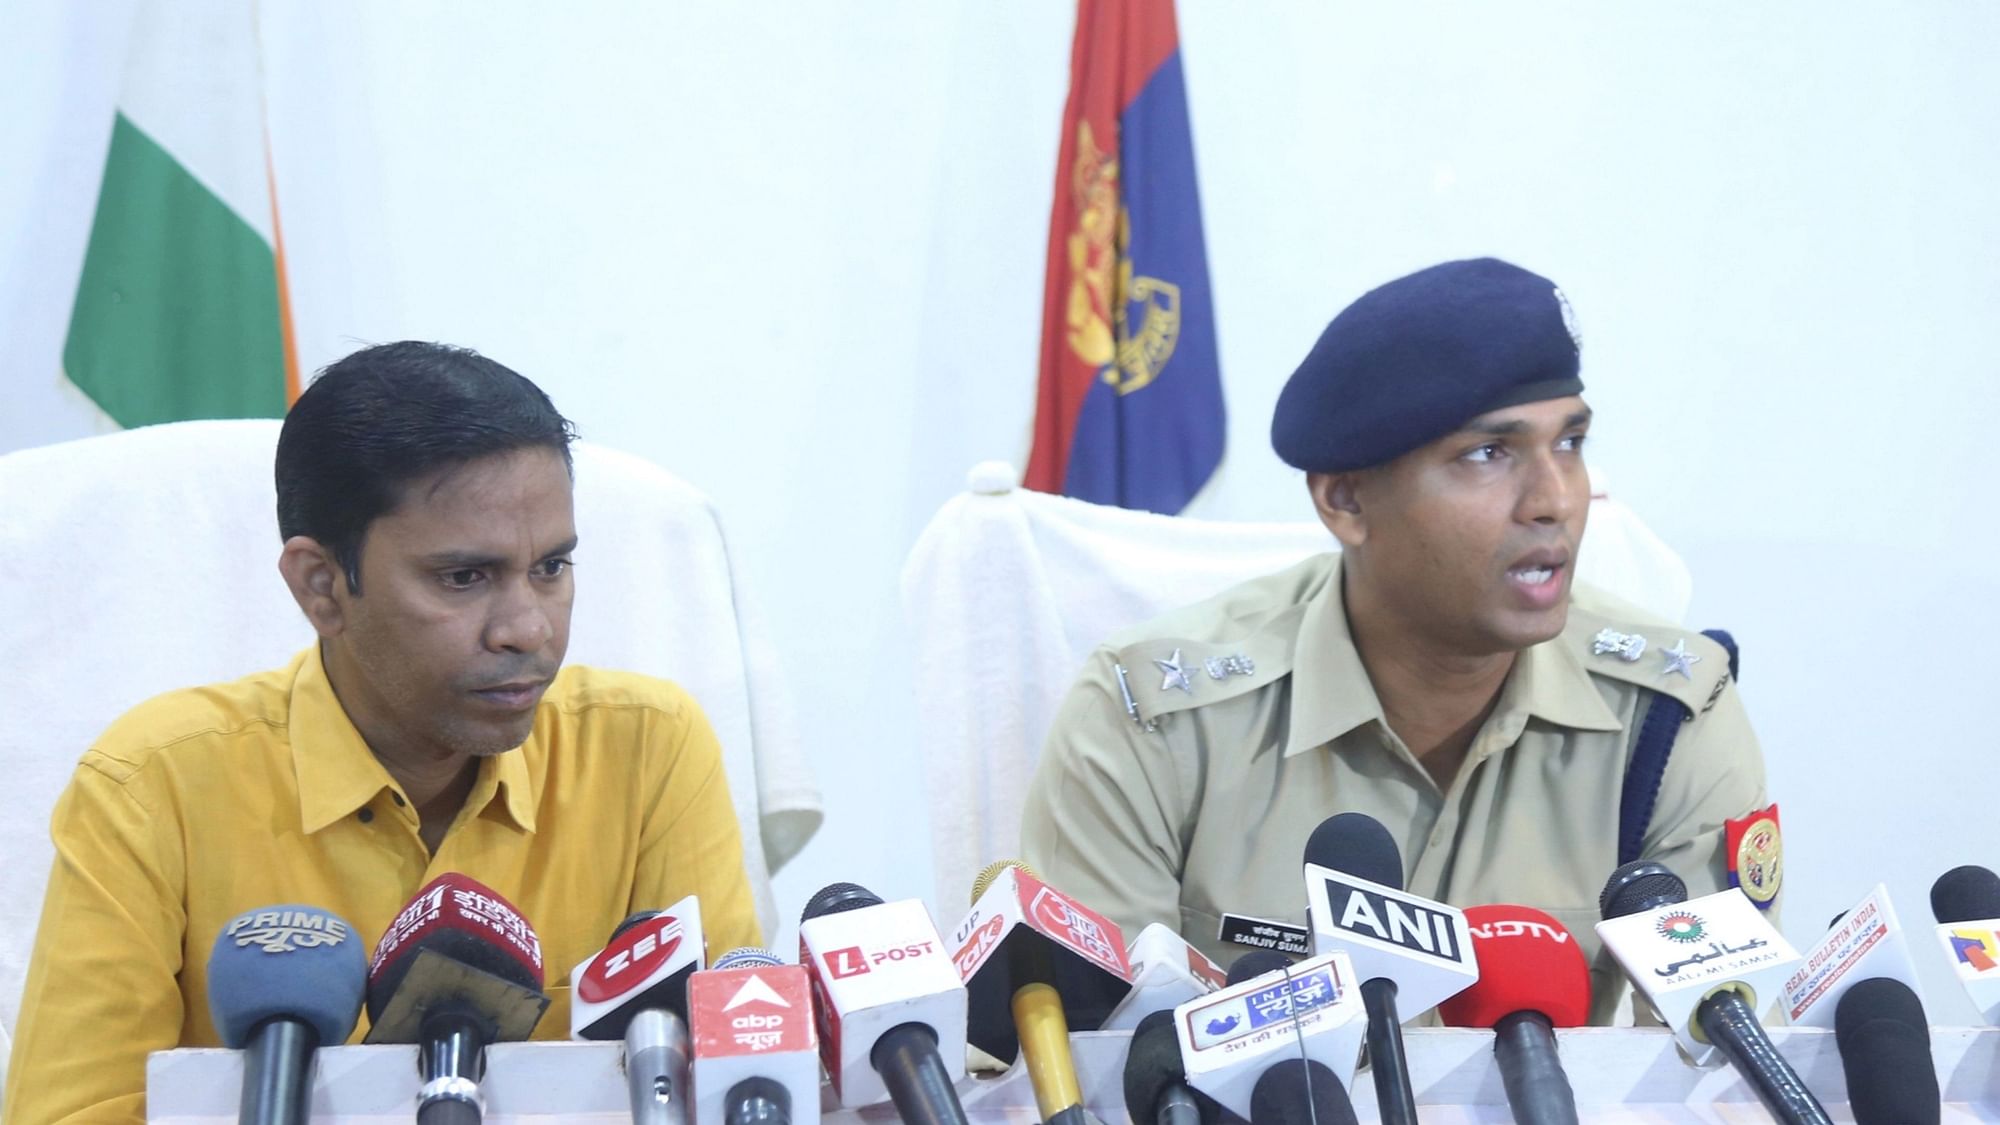 <div class="paragraphs"><p>Six accused have been taken into custody and are being interrogated by the police, Lakhimpur Kheri Superintendent of Police Sanjiv Suman told reporters in a press conference.</p></div>